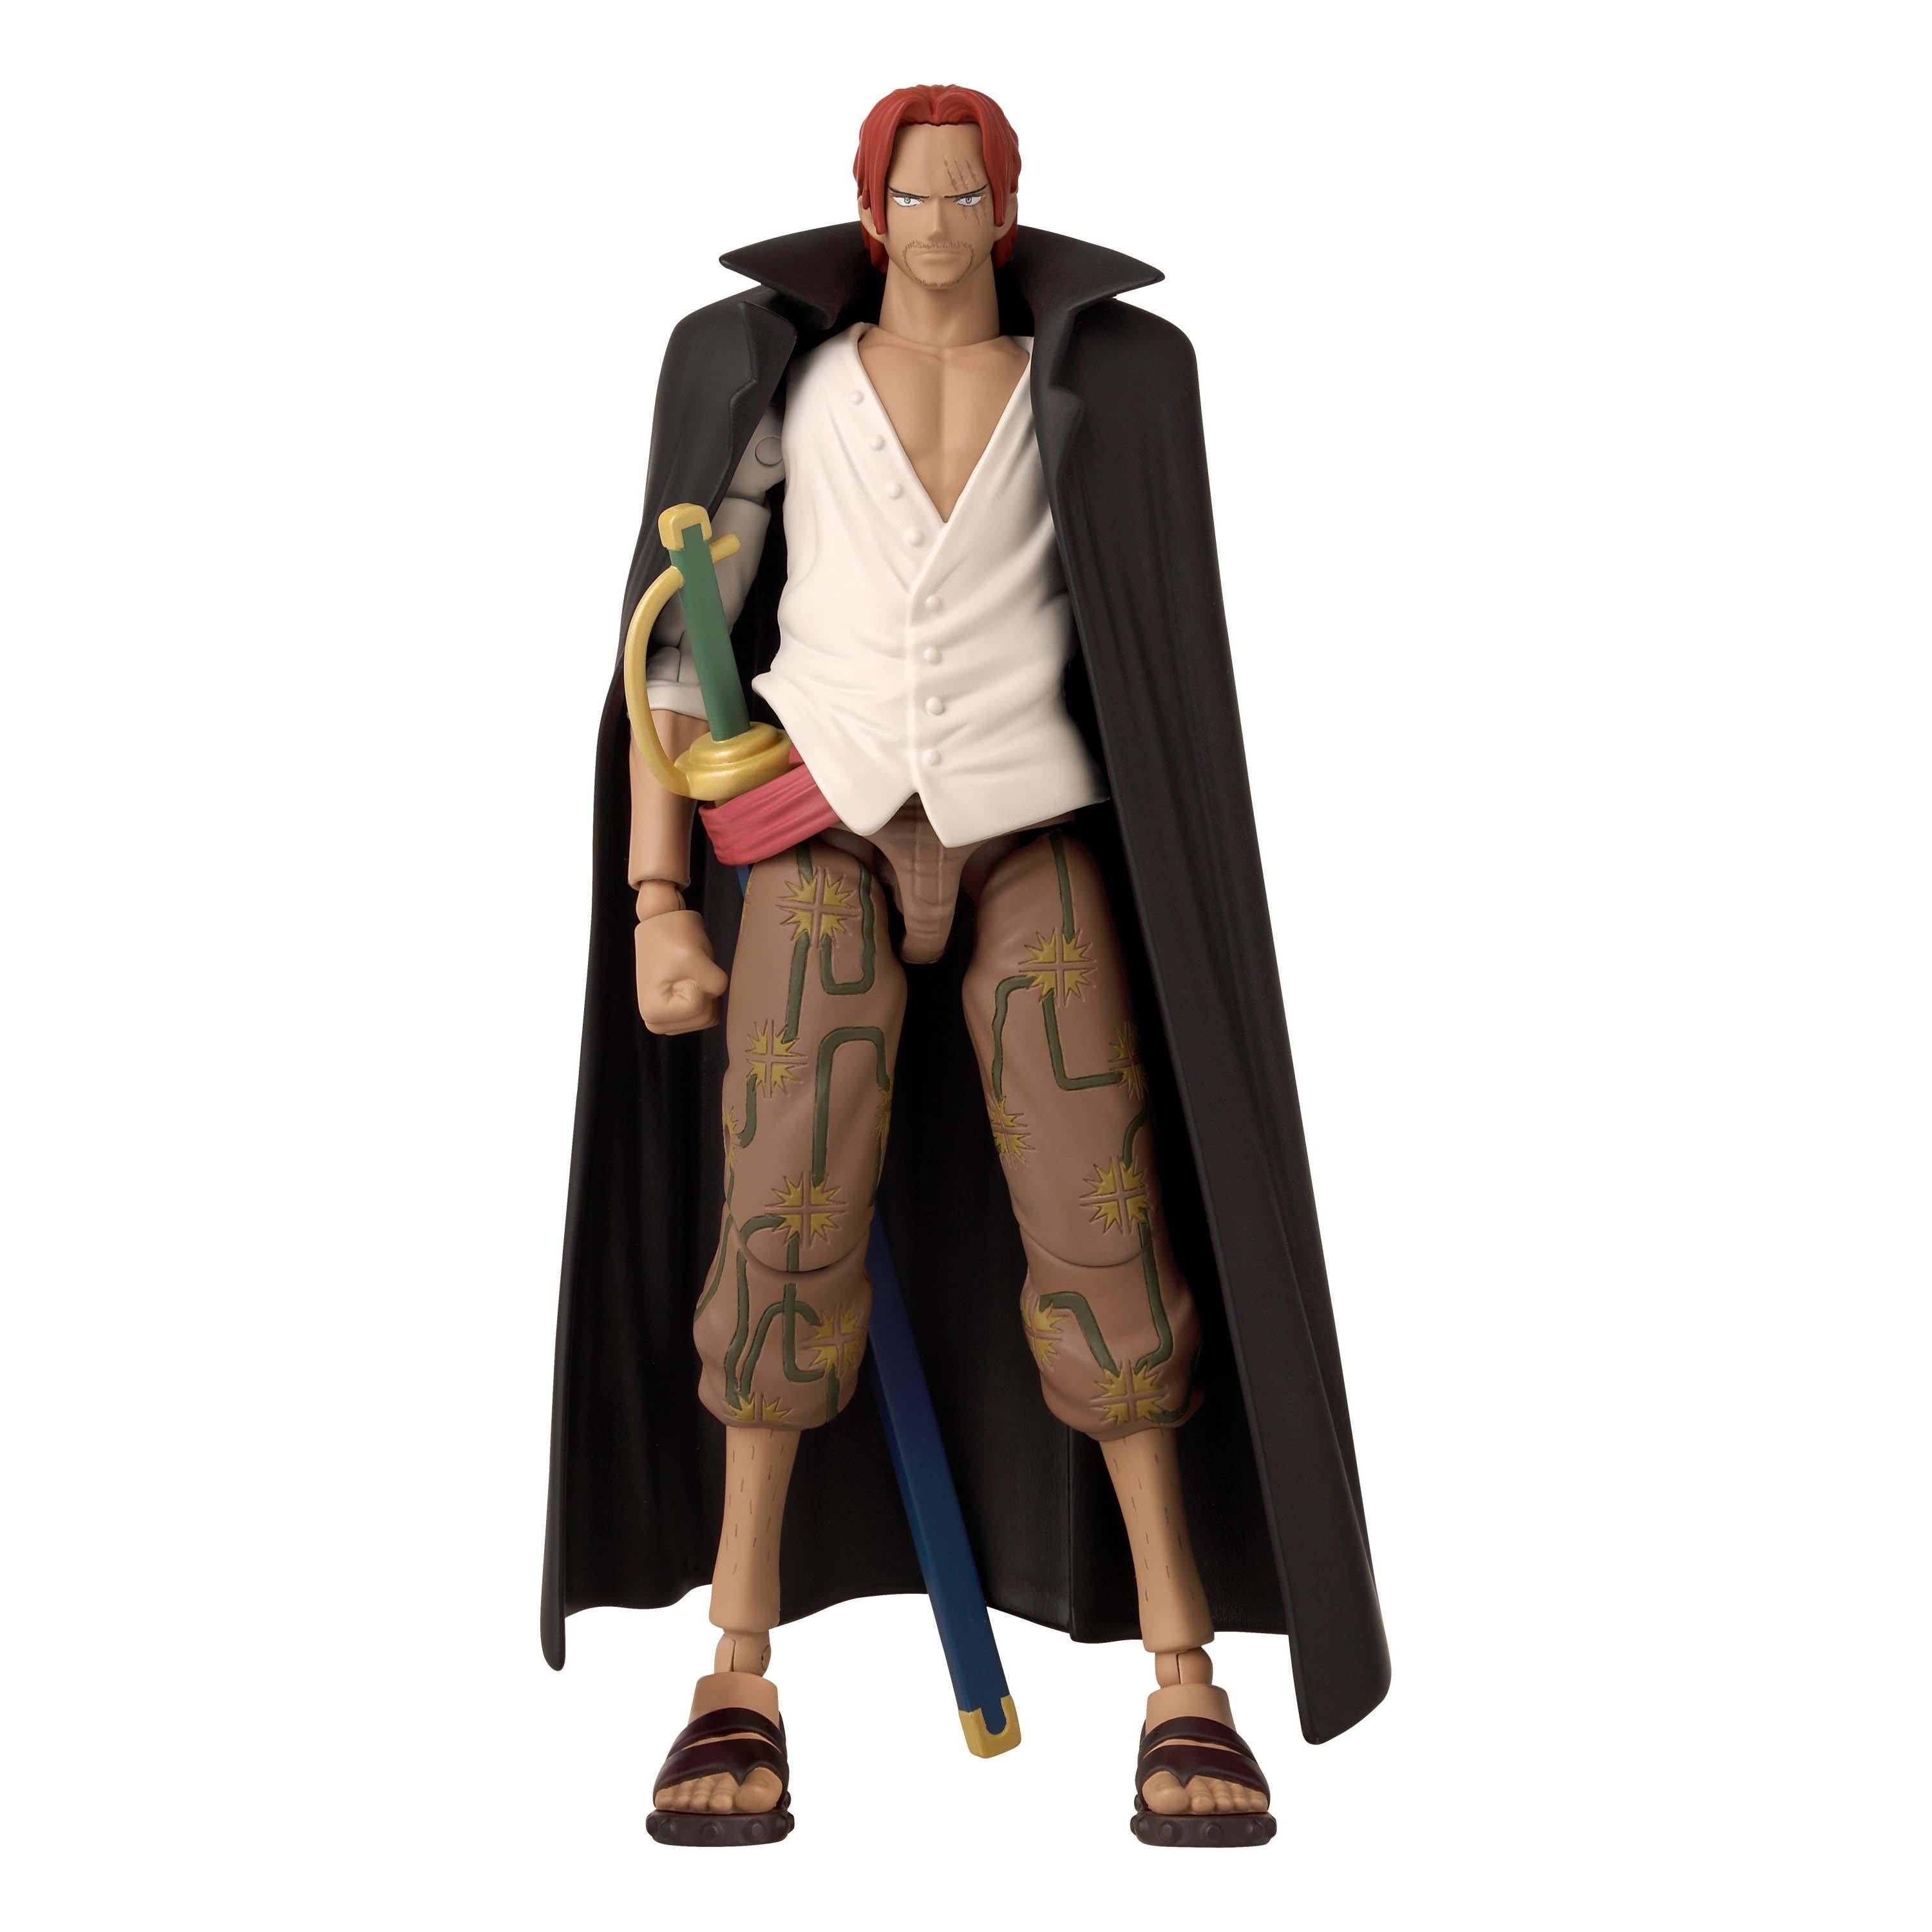 Buy Online Latest Premium Quality Ah One Piece Shanks - Buy Tech Today